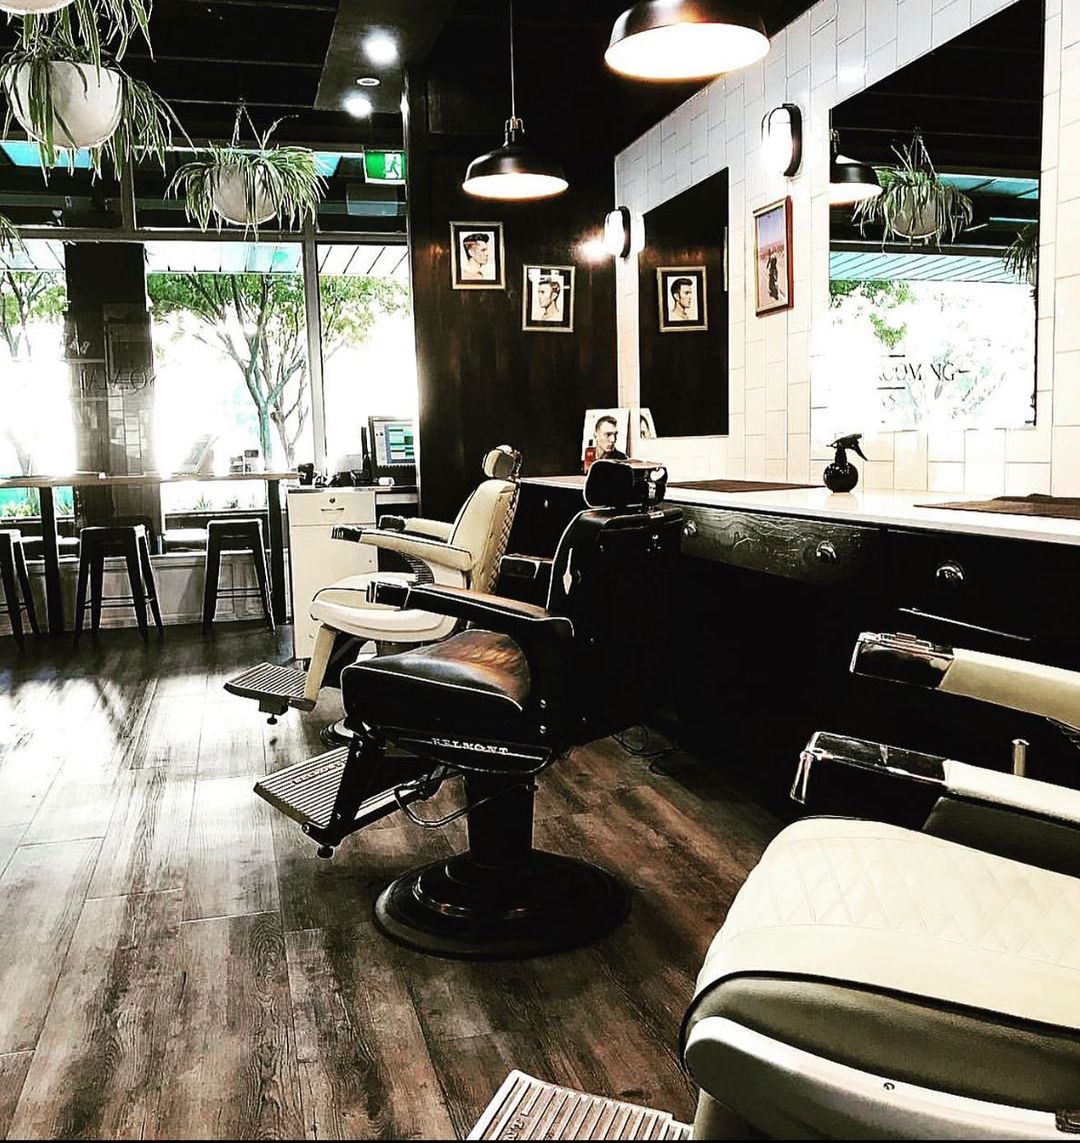 The 10 Best Barbers In Brisbane For Male Grooming [2022 Guide]